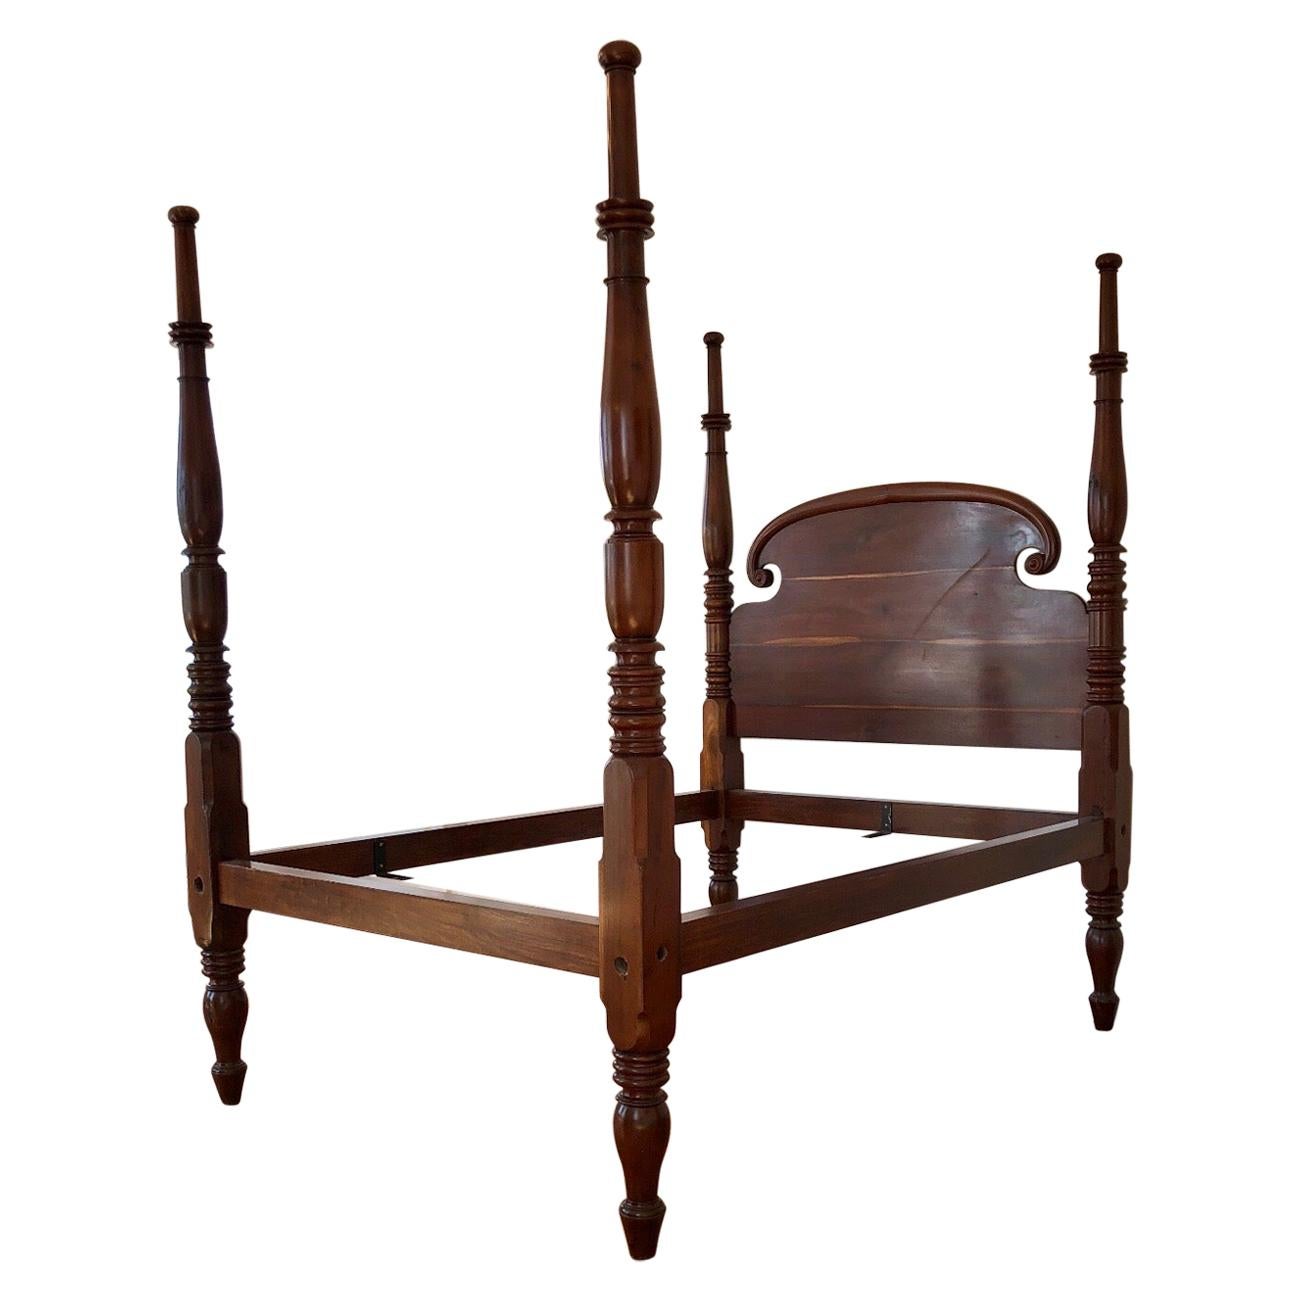 St. Croix Regency Four Poster Mahogany Queen Bed, 19th Century